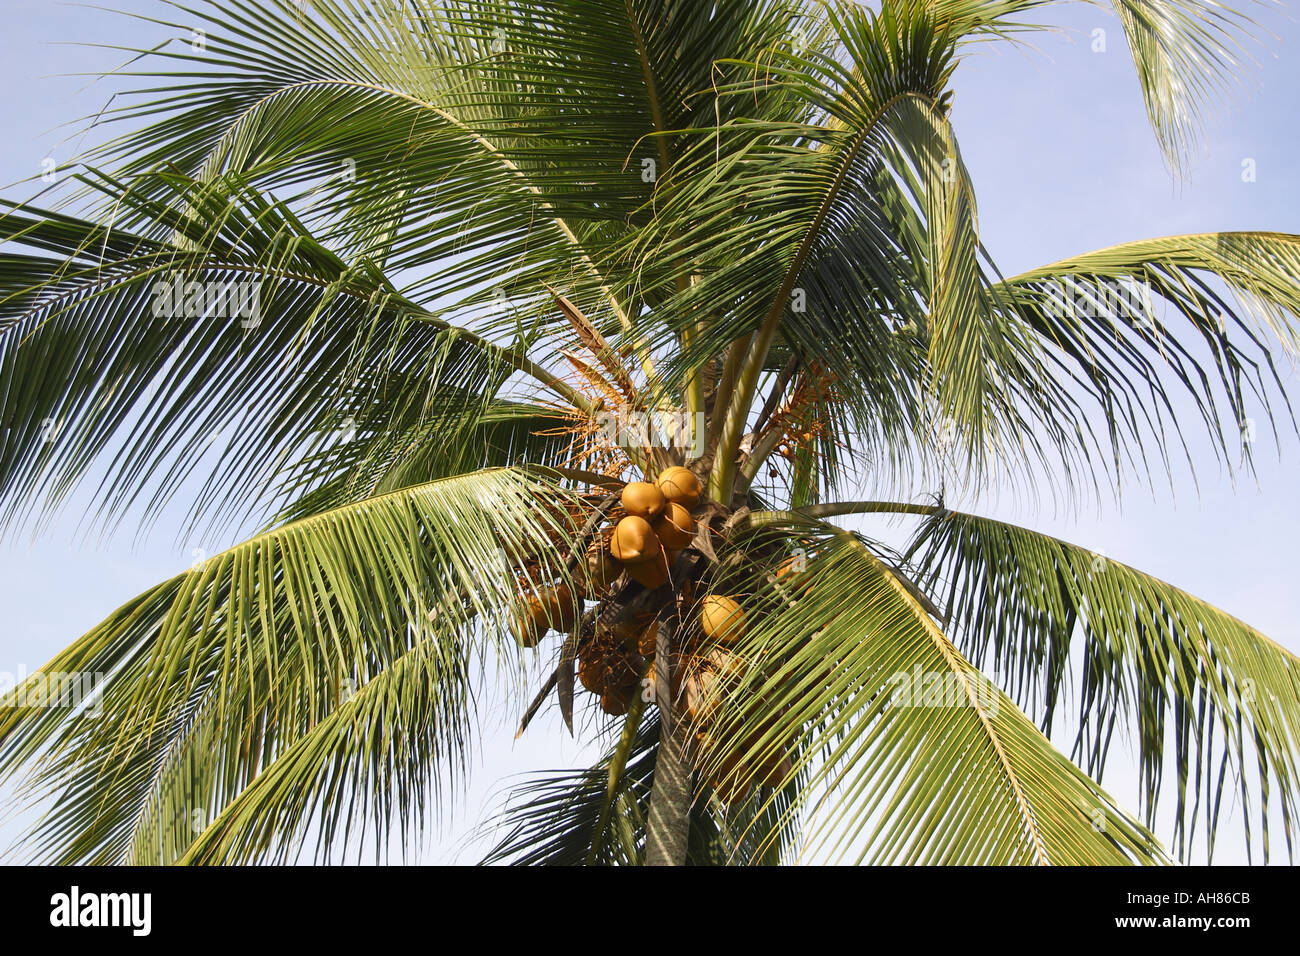 Coconut palm tree with coconuts Stock Photo